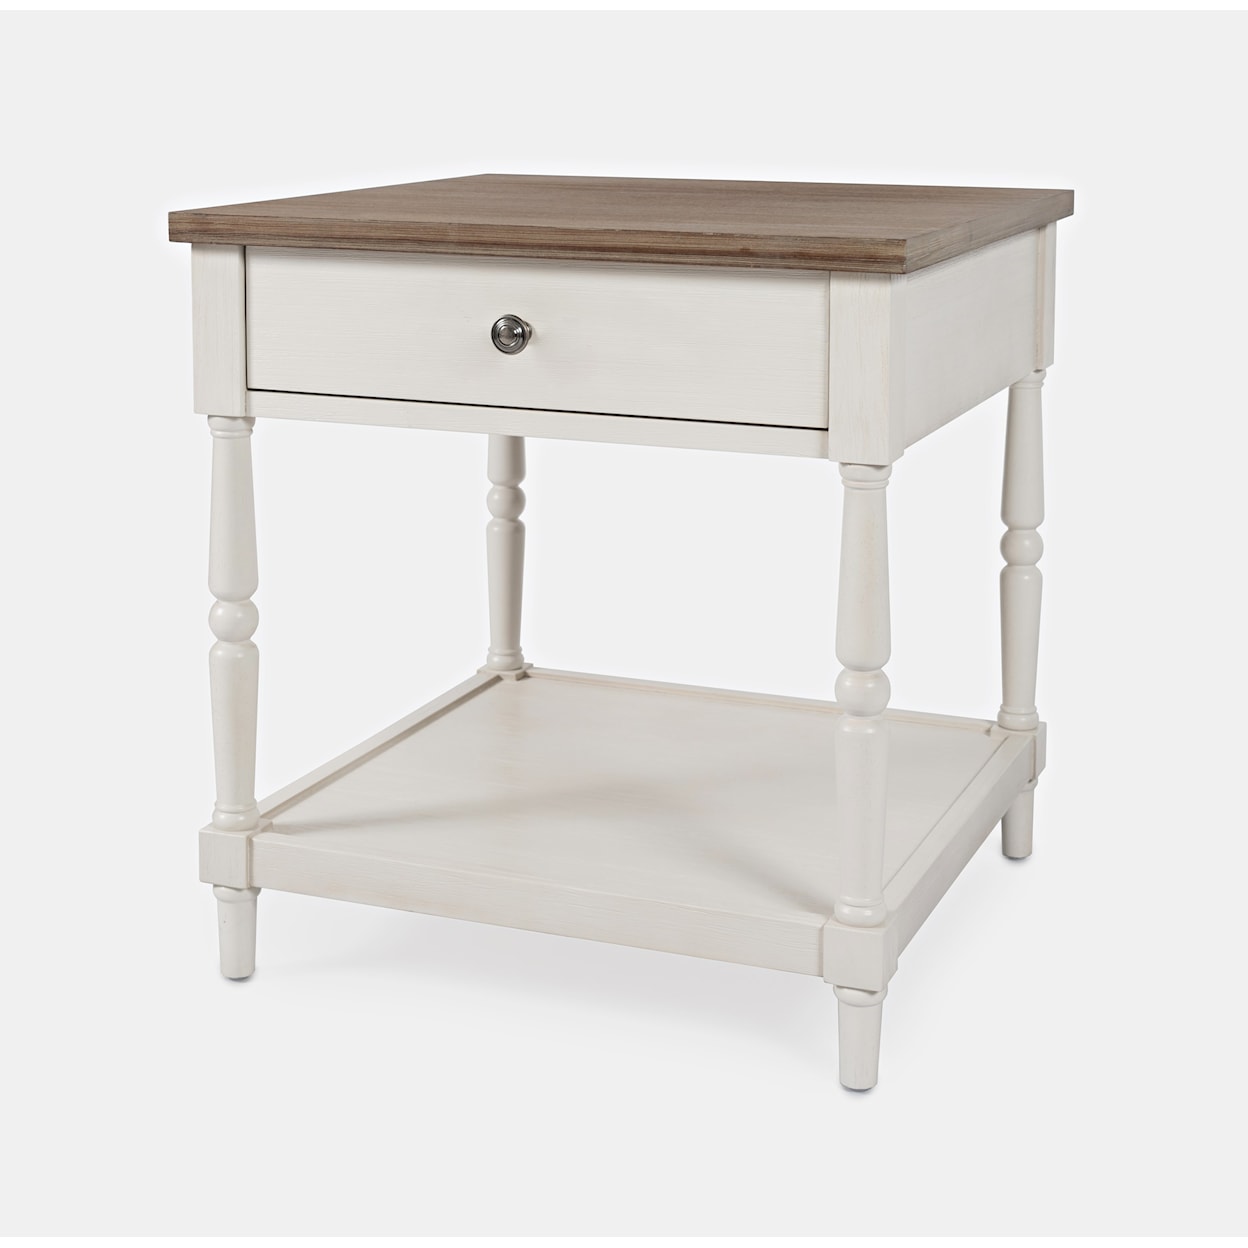 VFM Signature Grafton Farms End Table with Drawer